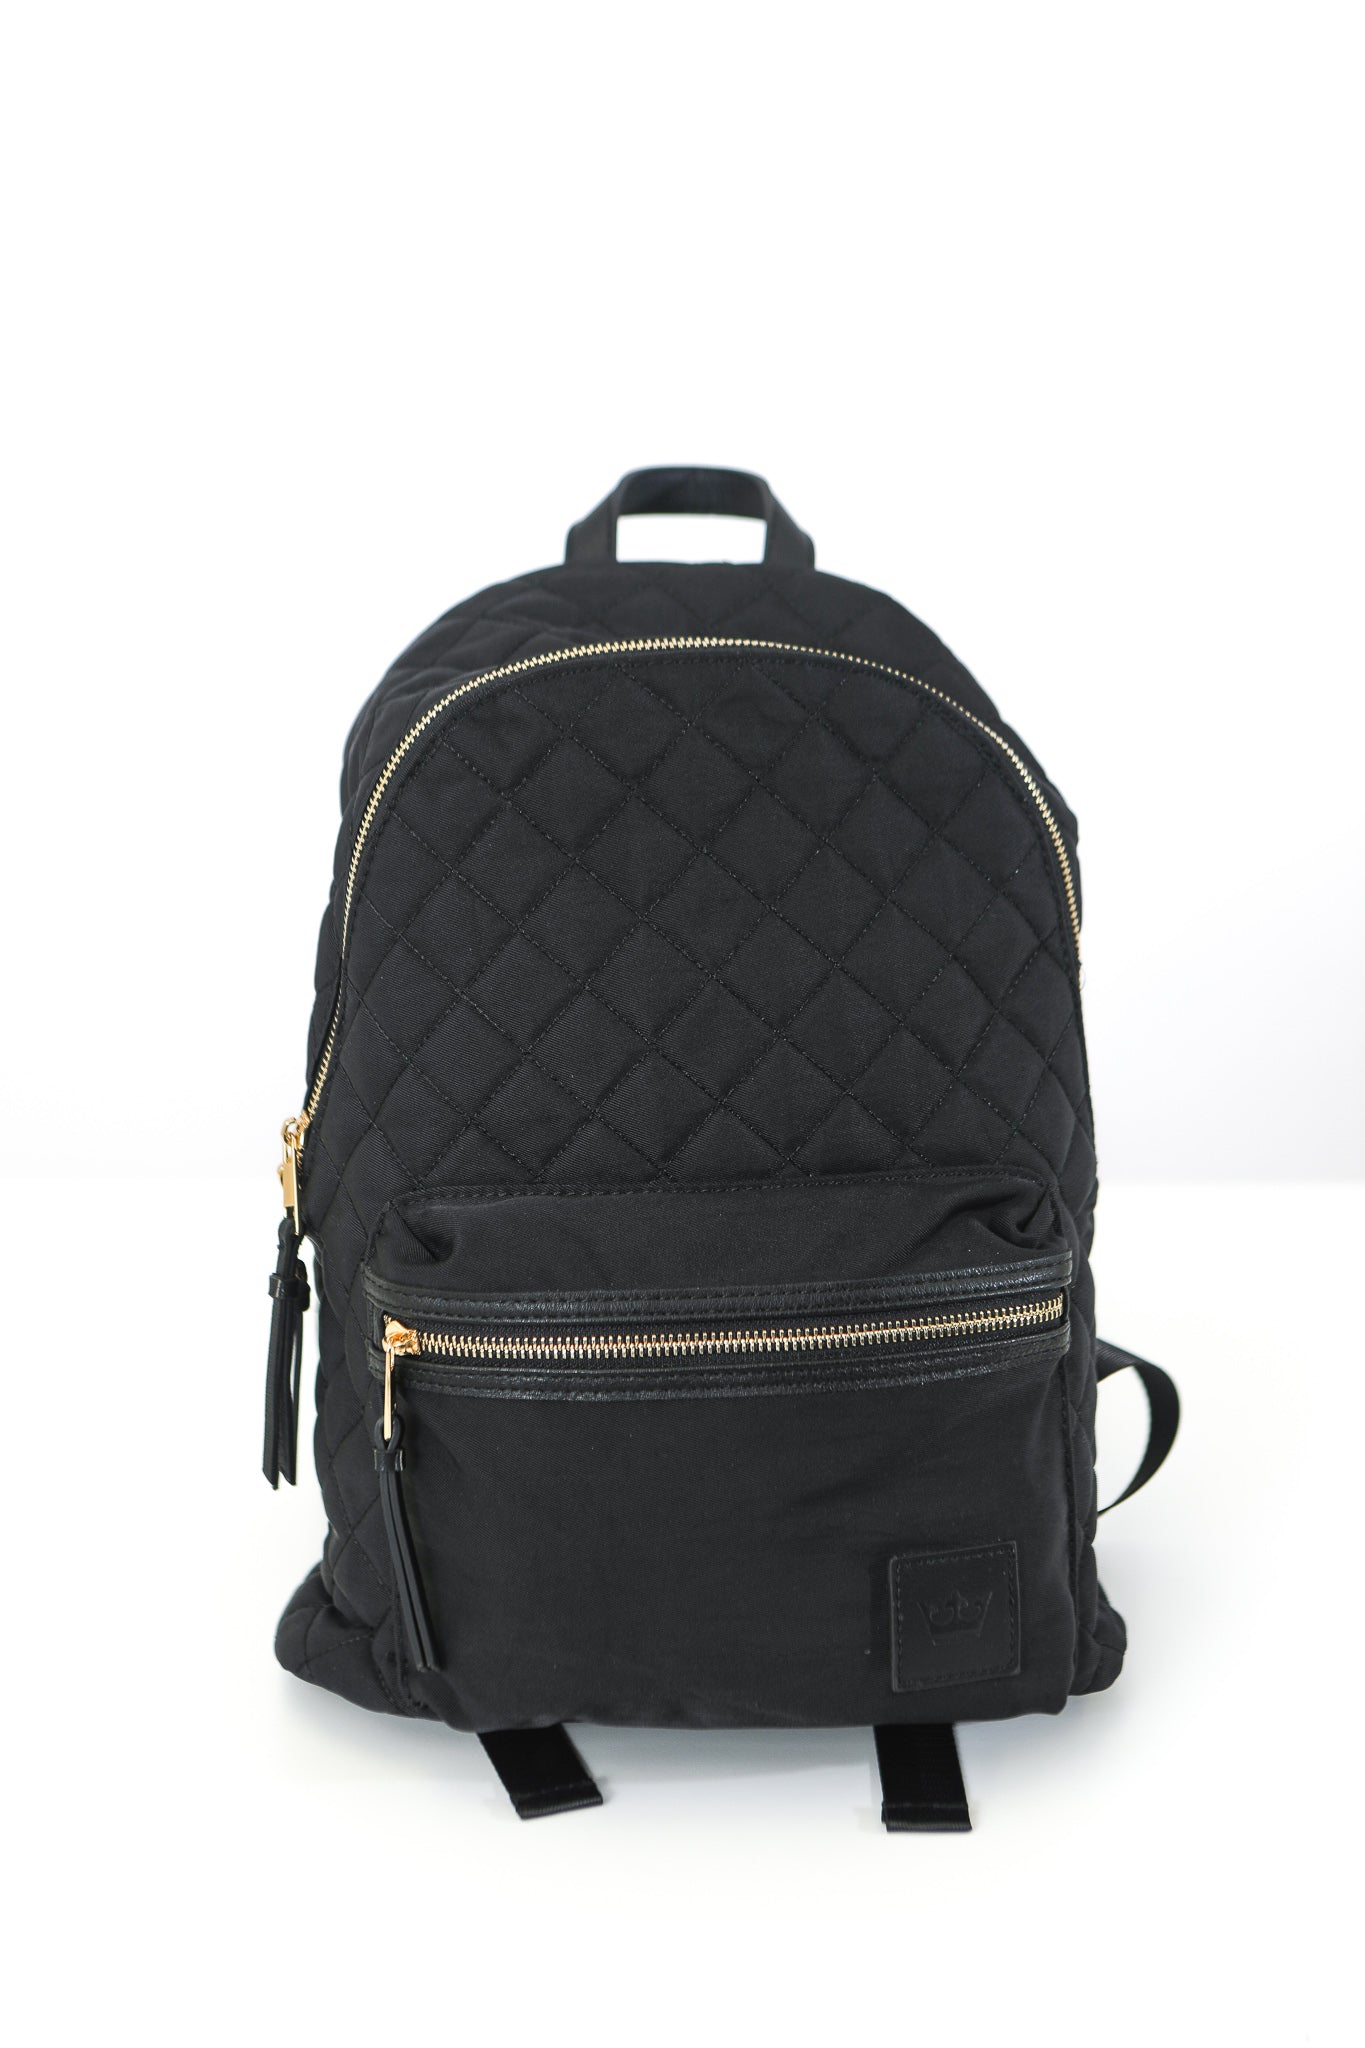 Back of black backpack with quilted pattern and gold zippers